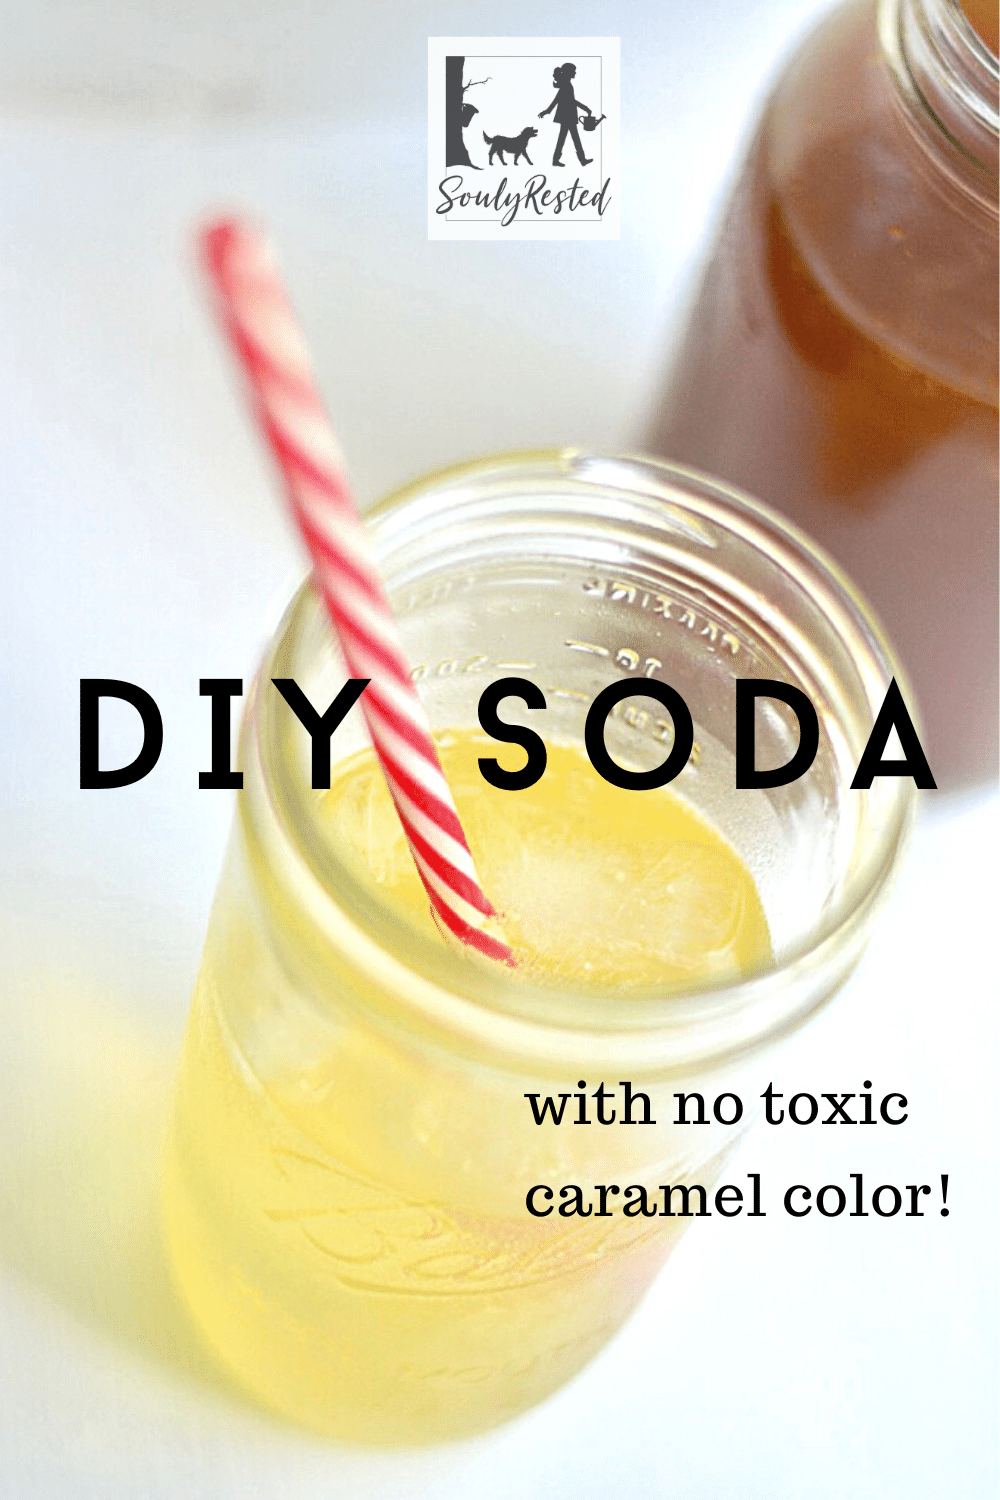 Homemade soda is superior in every way to store bought Coke. It's easy to make and so much better for you.